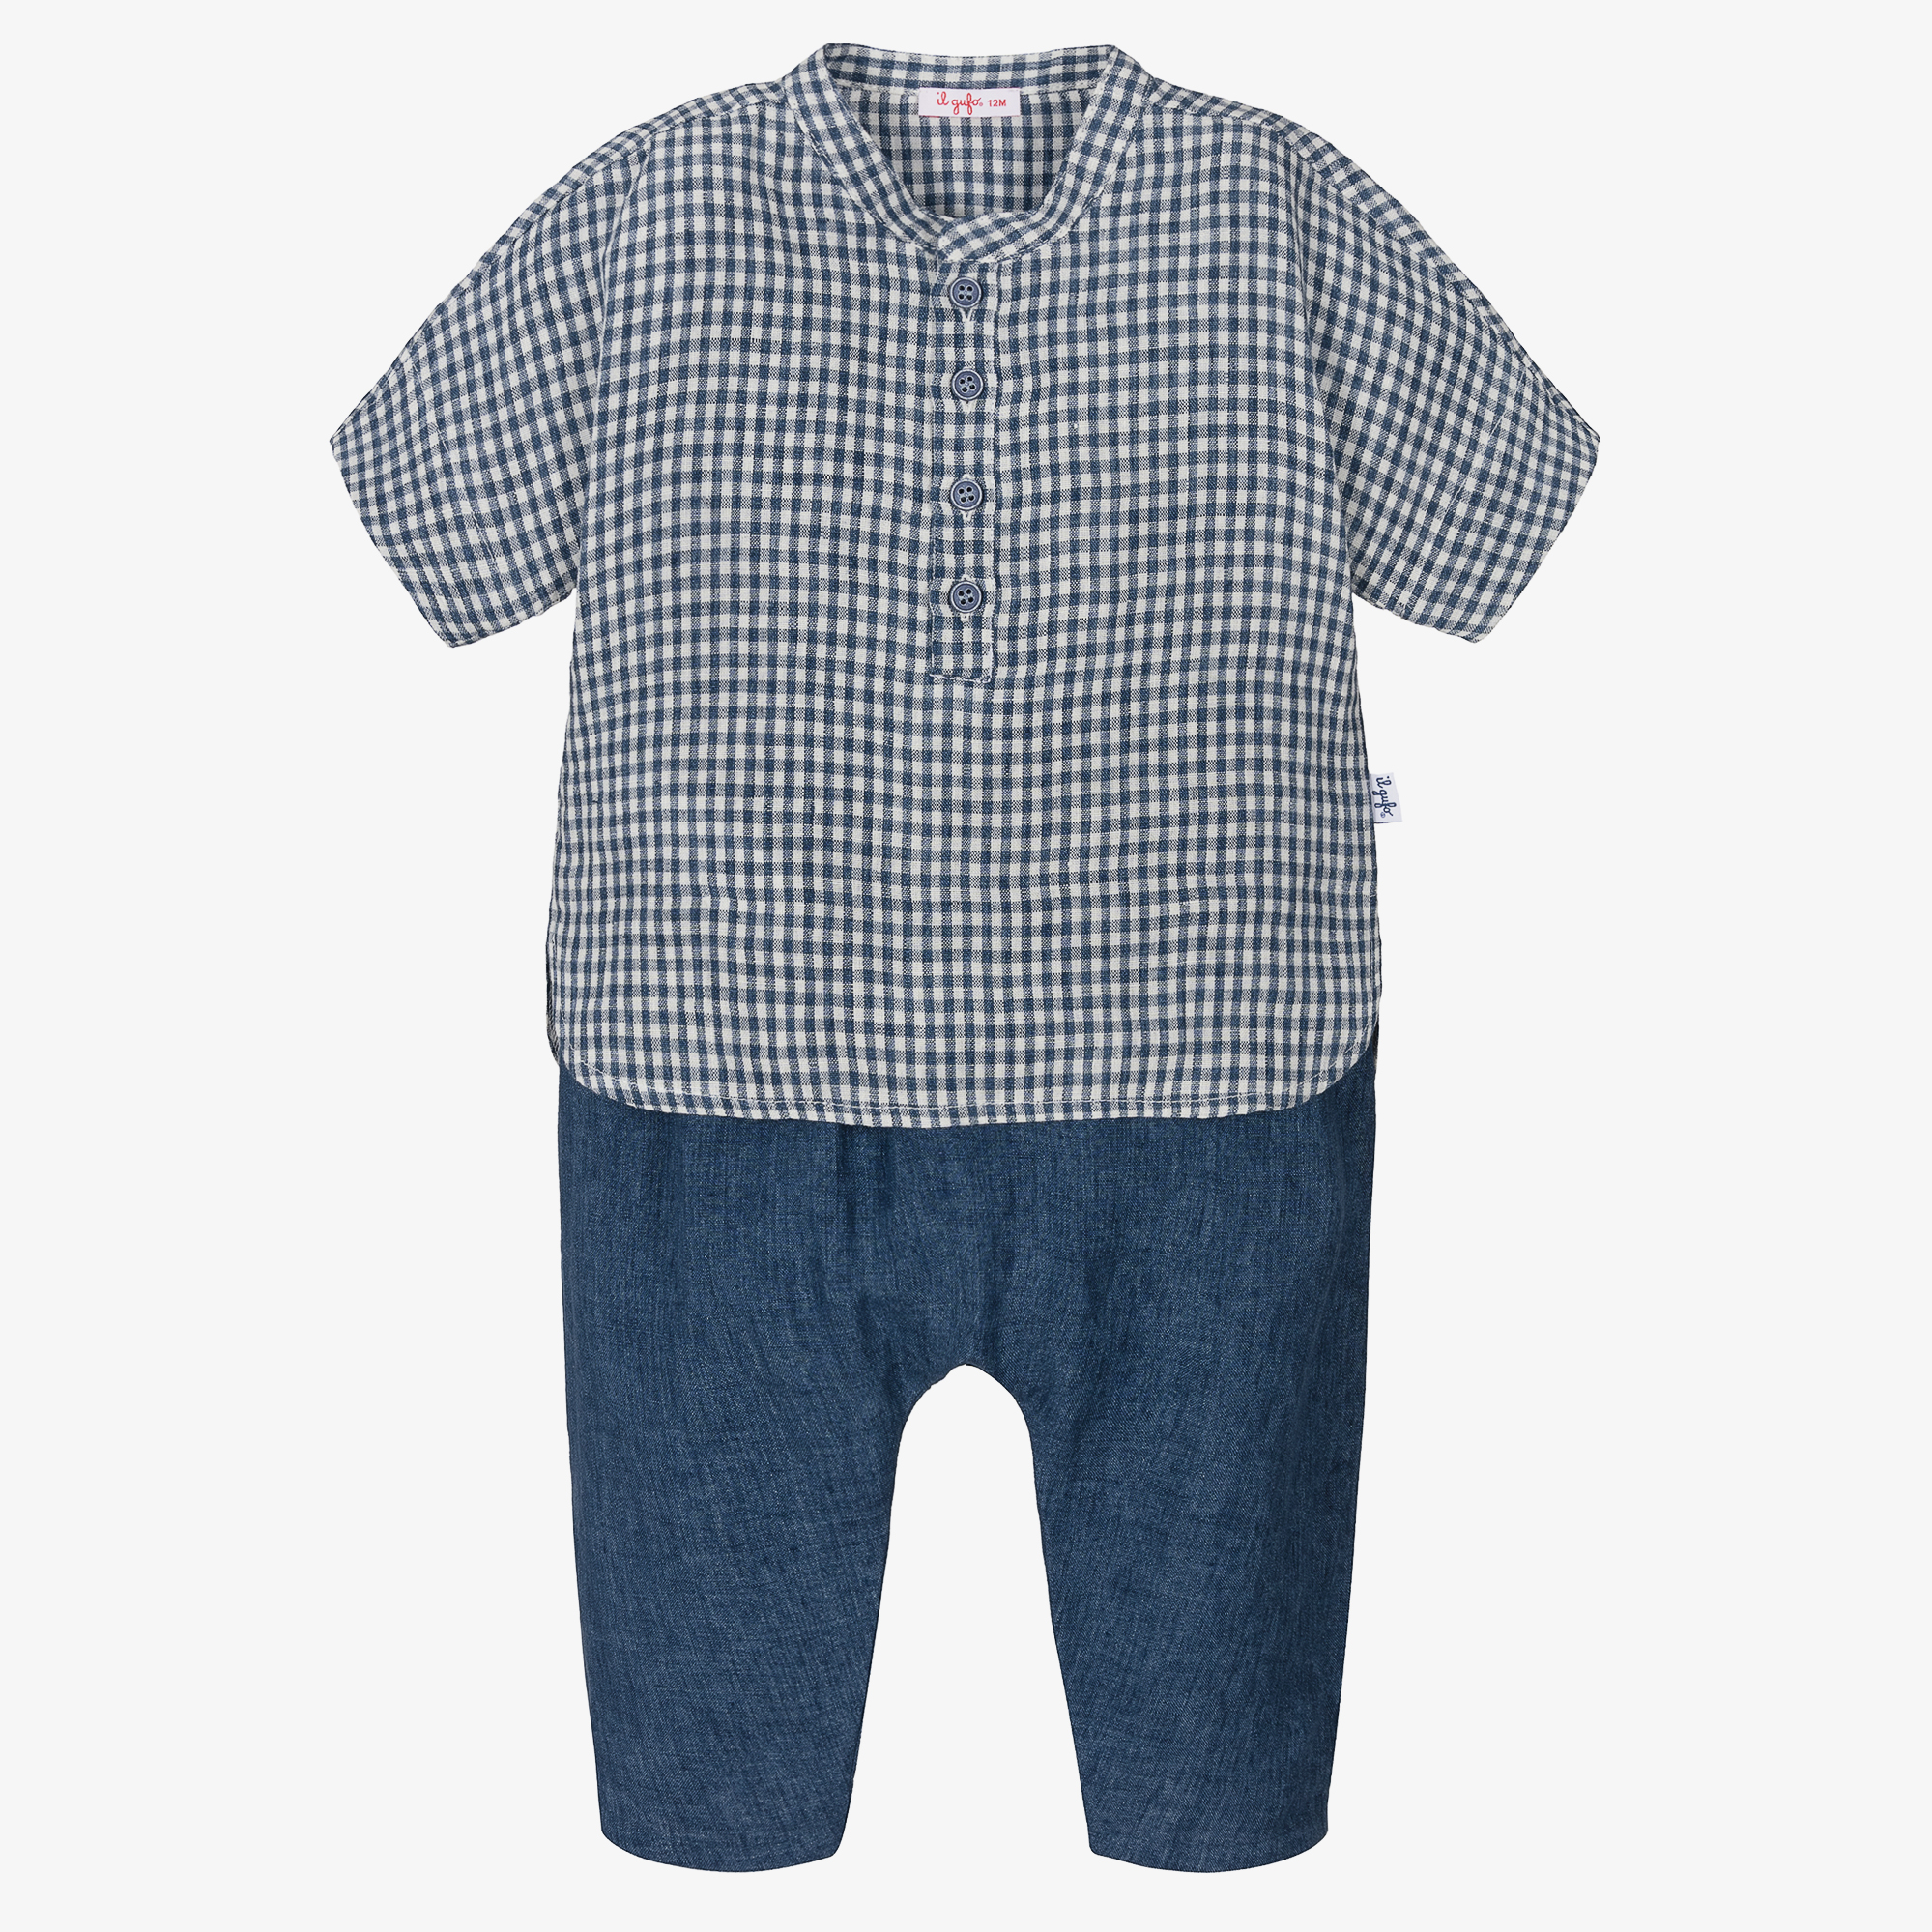 ERL boys corduroy trousers compare prices and buy online